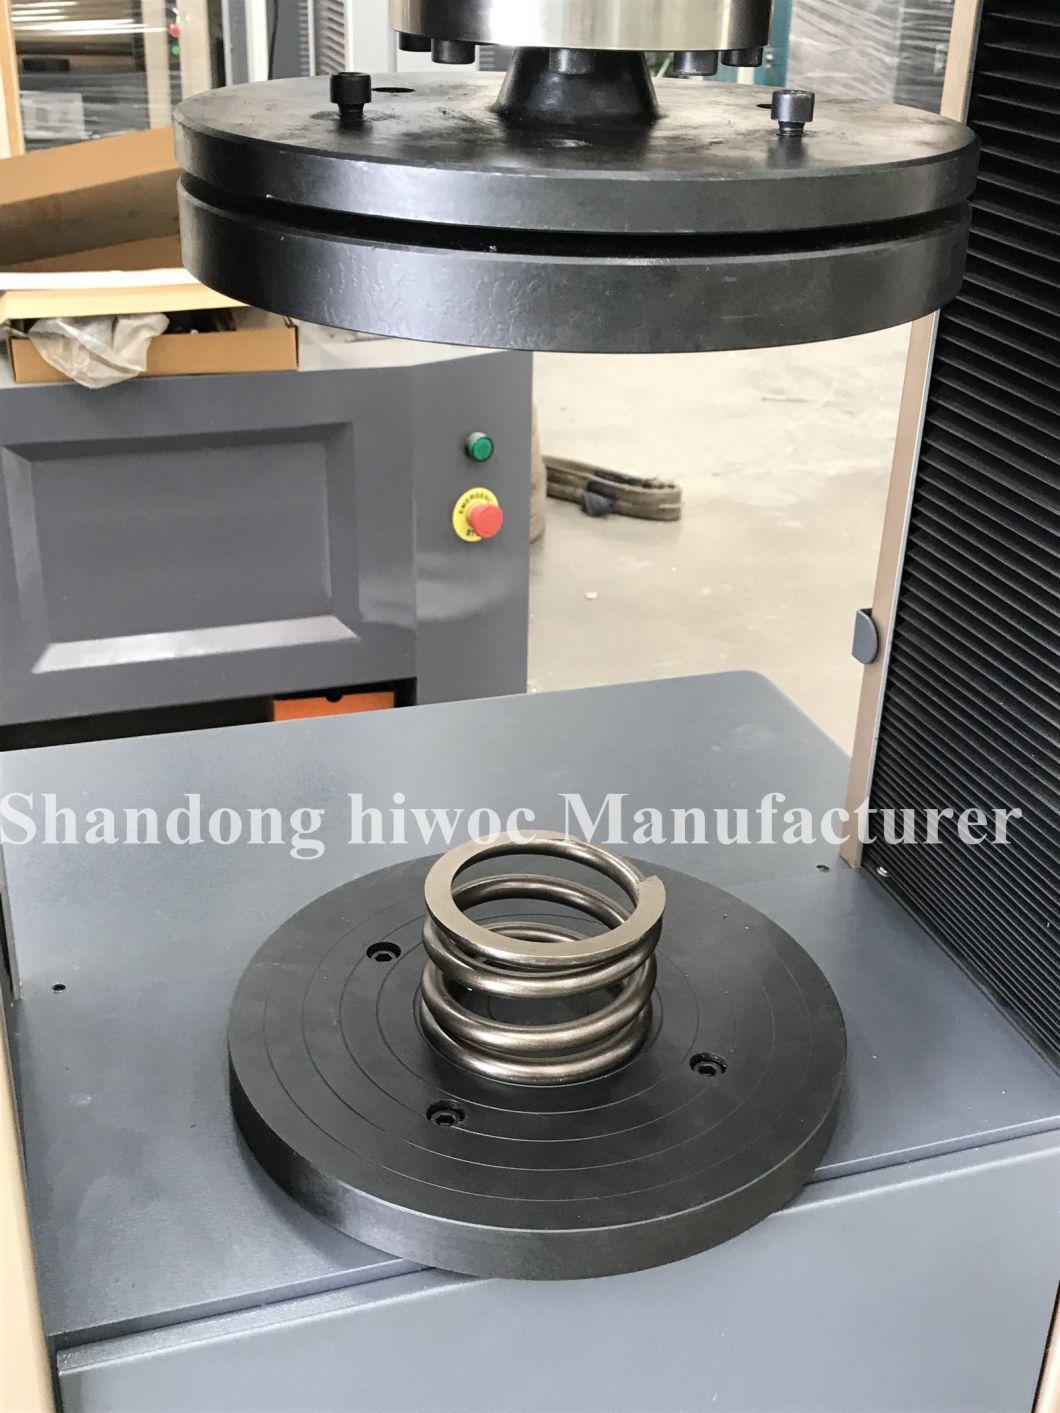 Factory Direct Sale Cheap Price 2 Years Warranty Time Electronic Computer Rubber Tensile Testing Machine Price Wdw-5/ Universal Testing Machine/ Tester